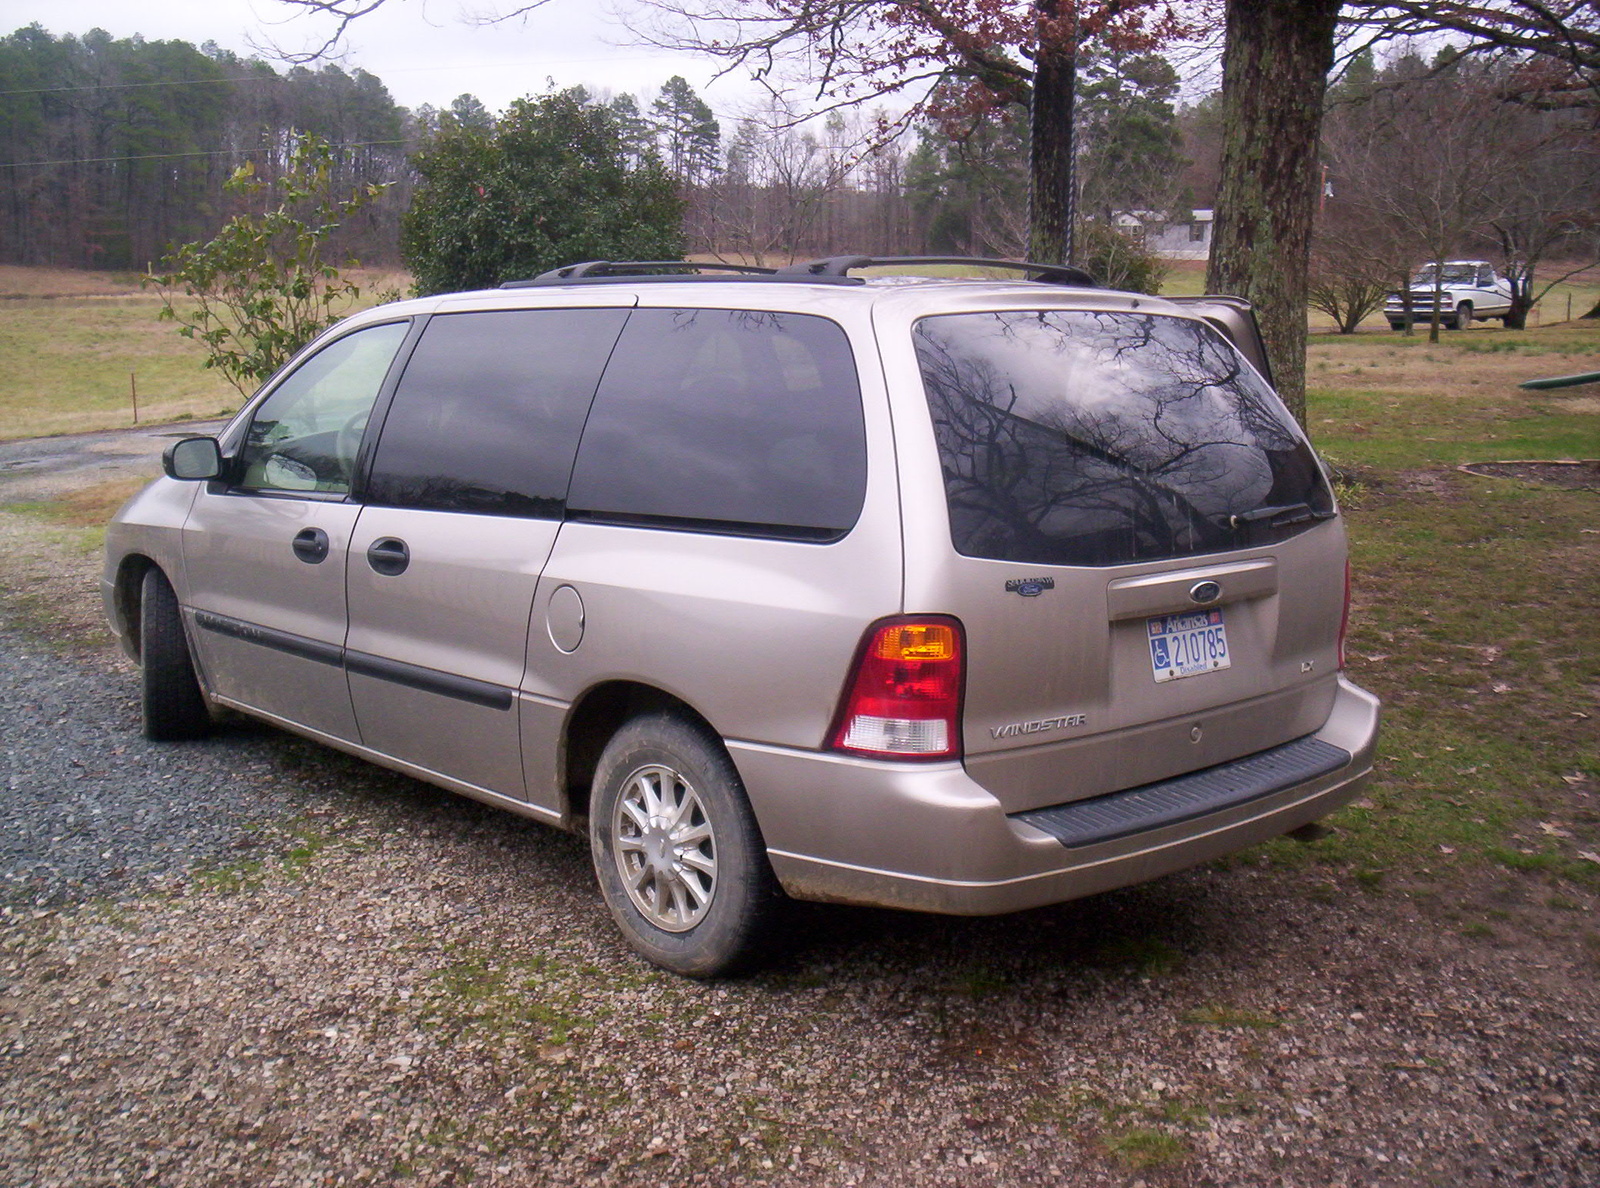 Ford windstar ratings #10